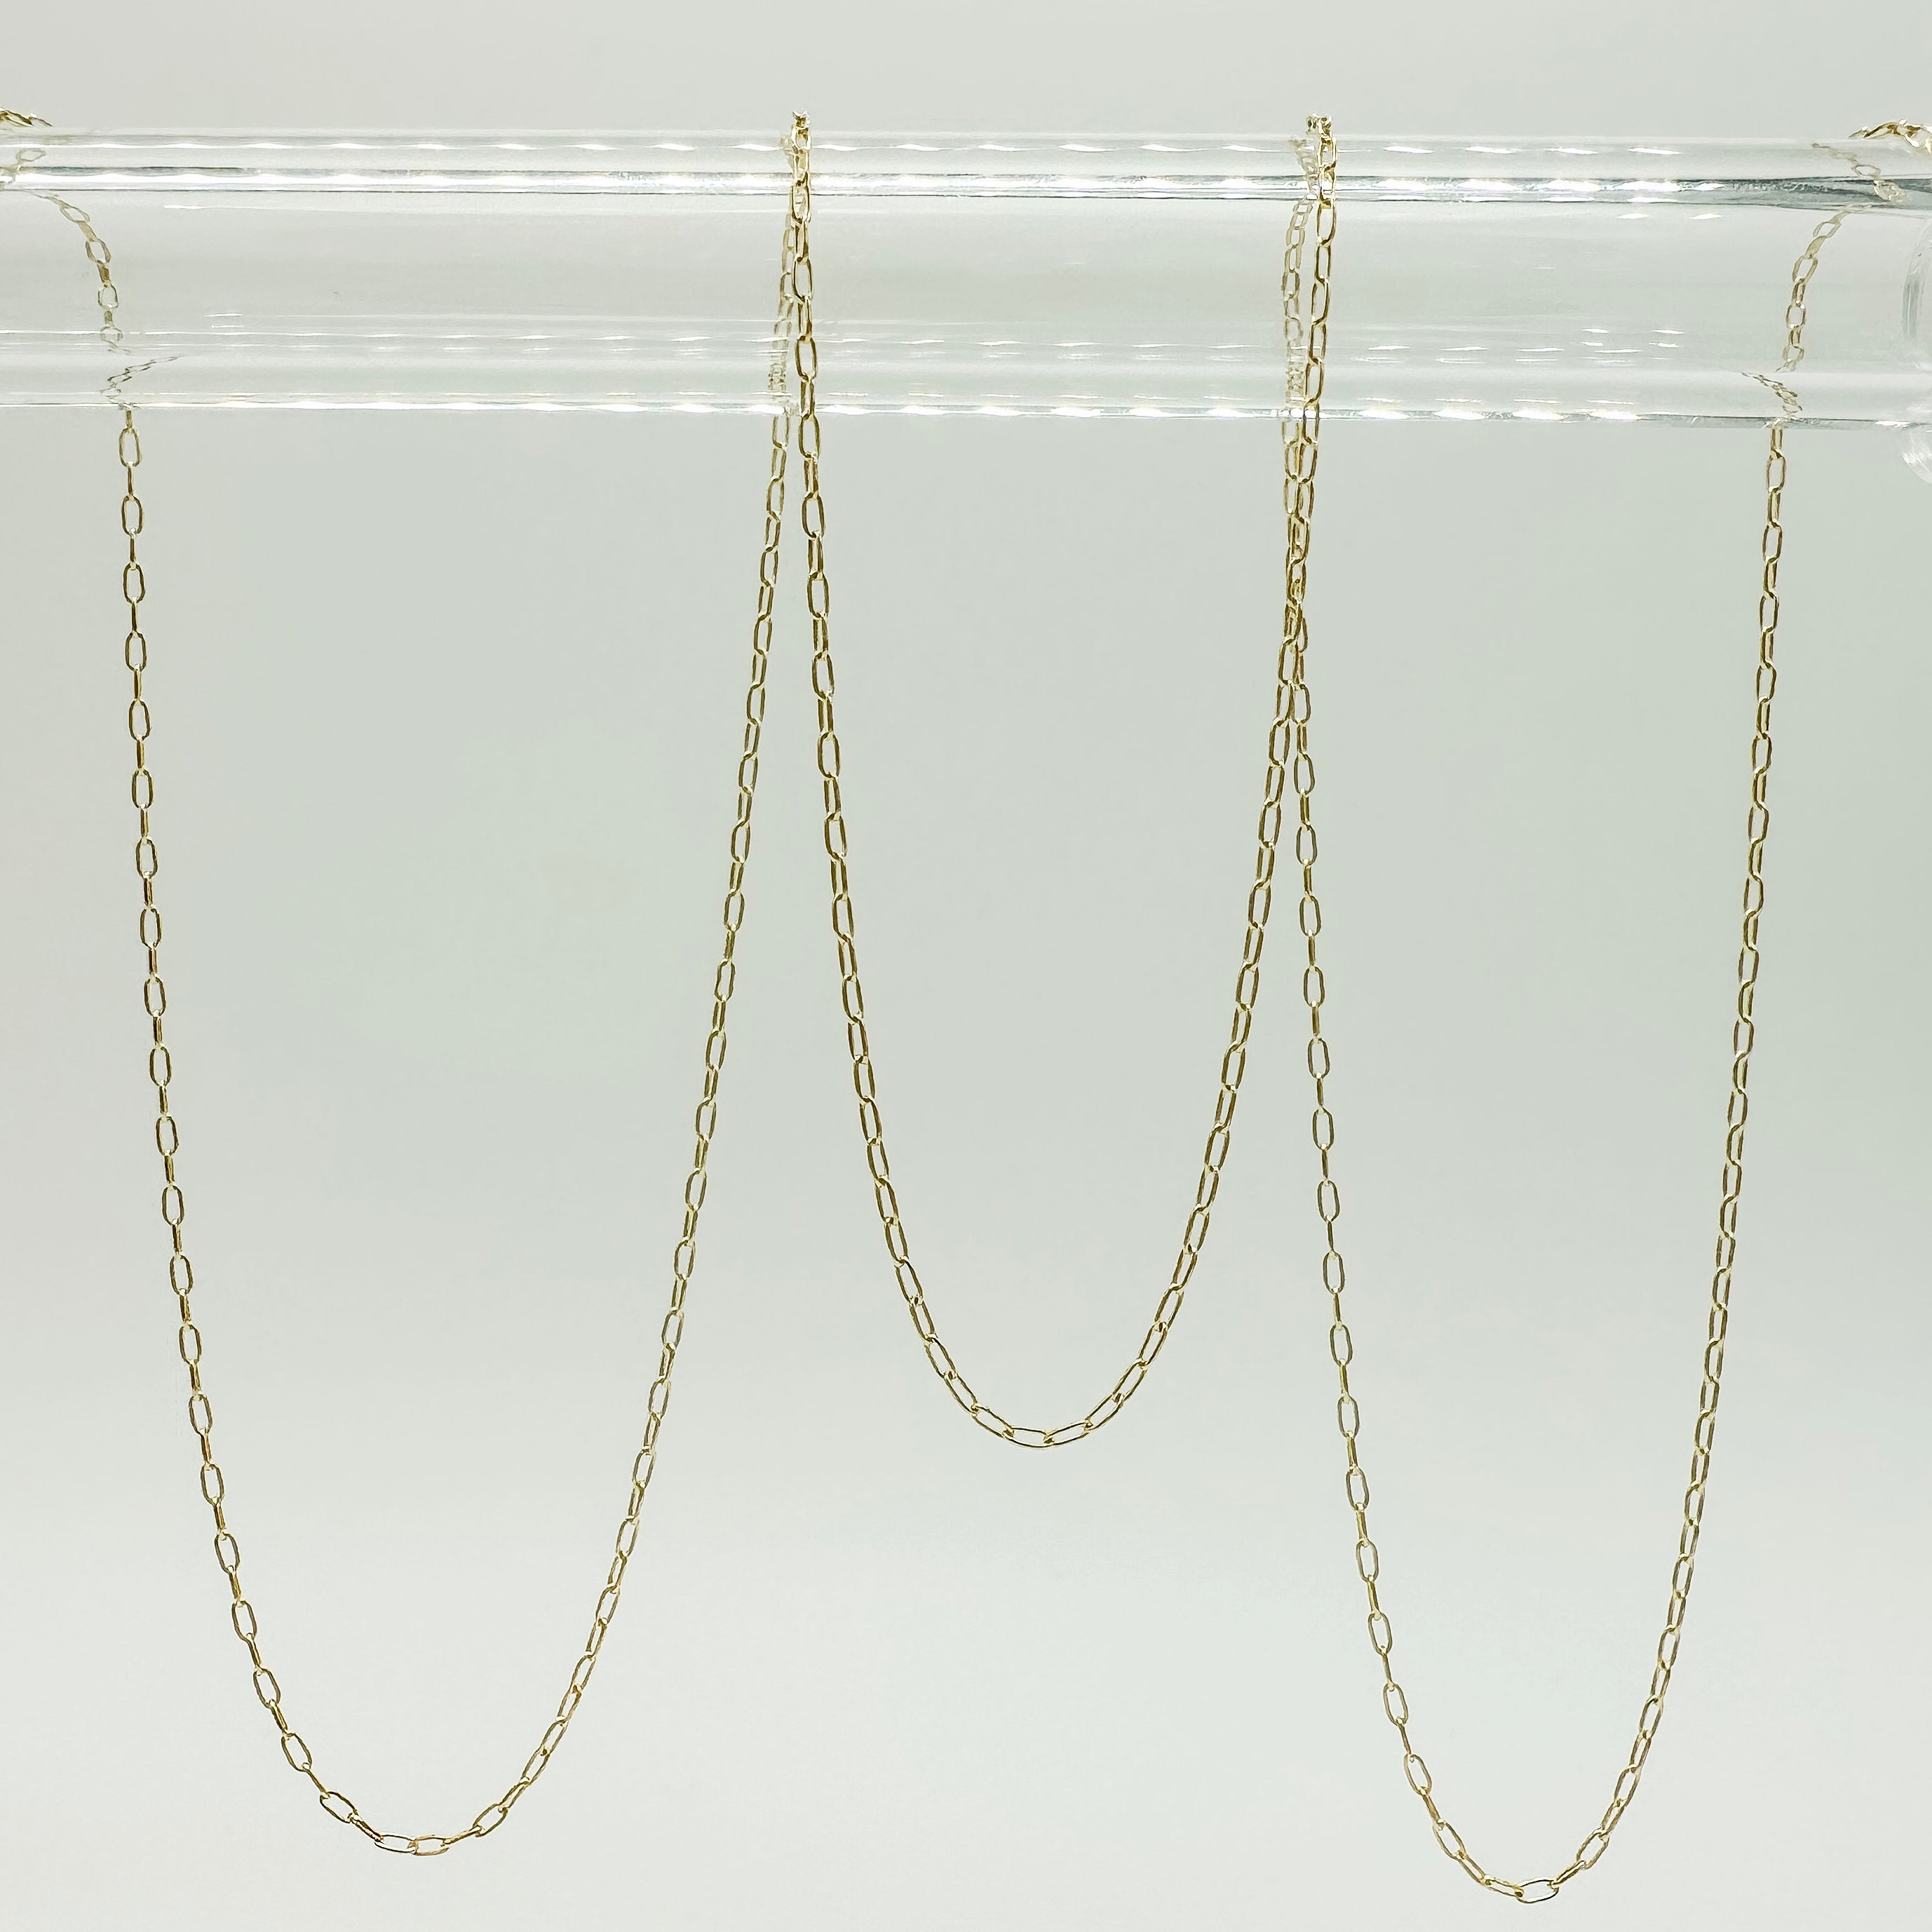 gold-filled chain / permanent jewelry supplier / permanent jewelry supplies / gold filled paperclip chain